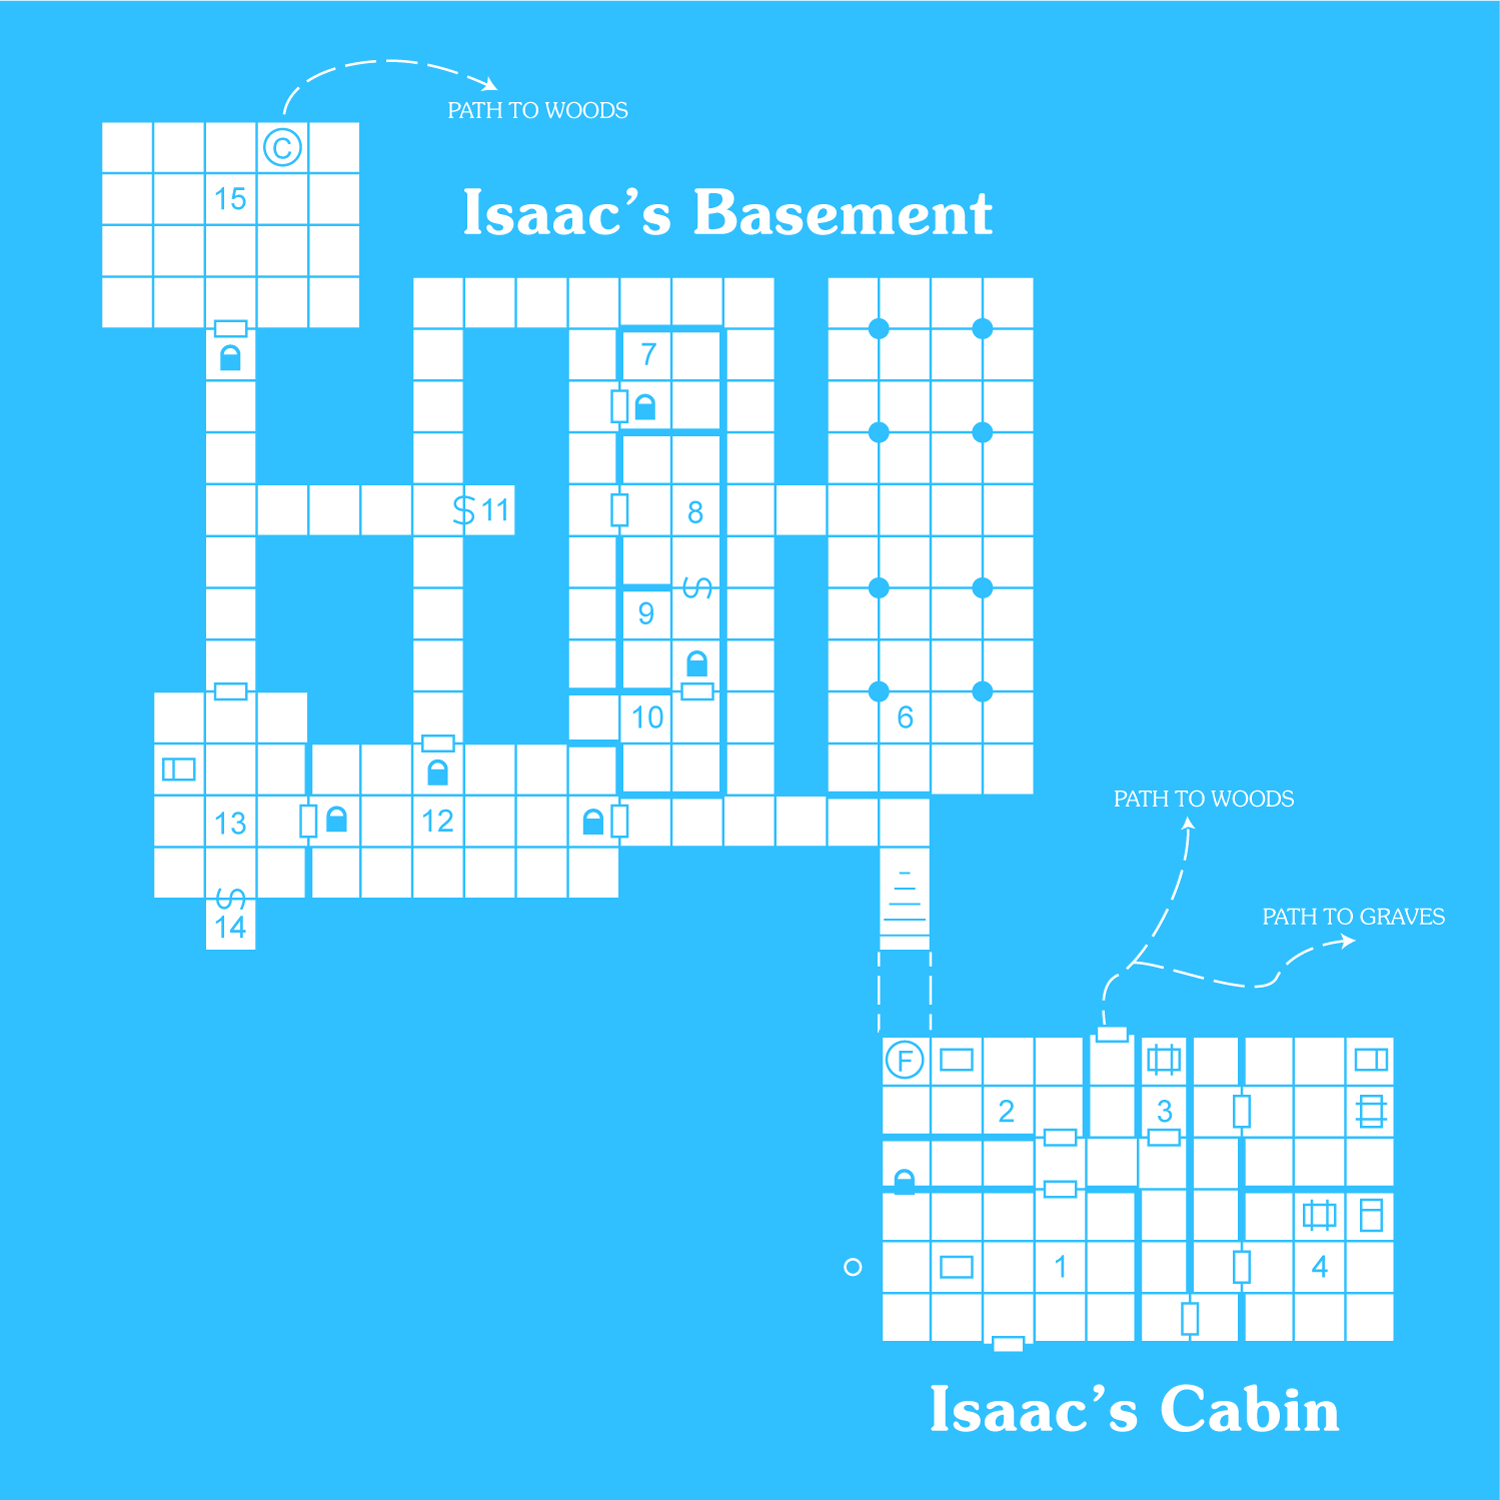 Map of Isaac’s Cabin and Basement